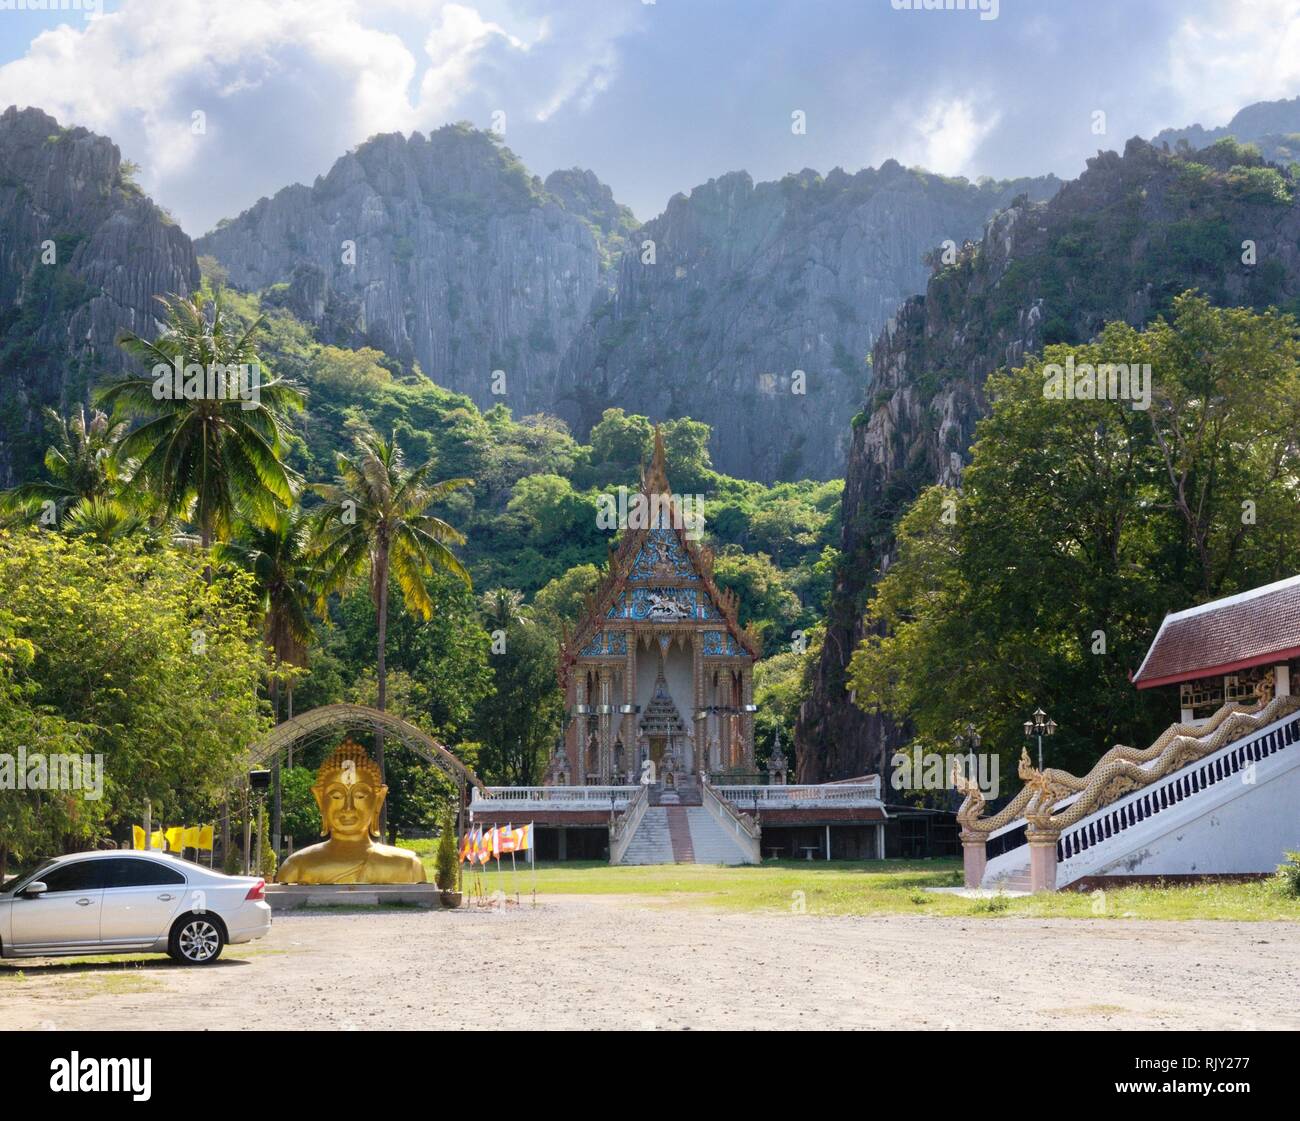 Wat Khao Daeng Thai Buddhist temple at the foot of the mountain range in Khao Sam Roi Yot National Park in Thailand Stock Photo